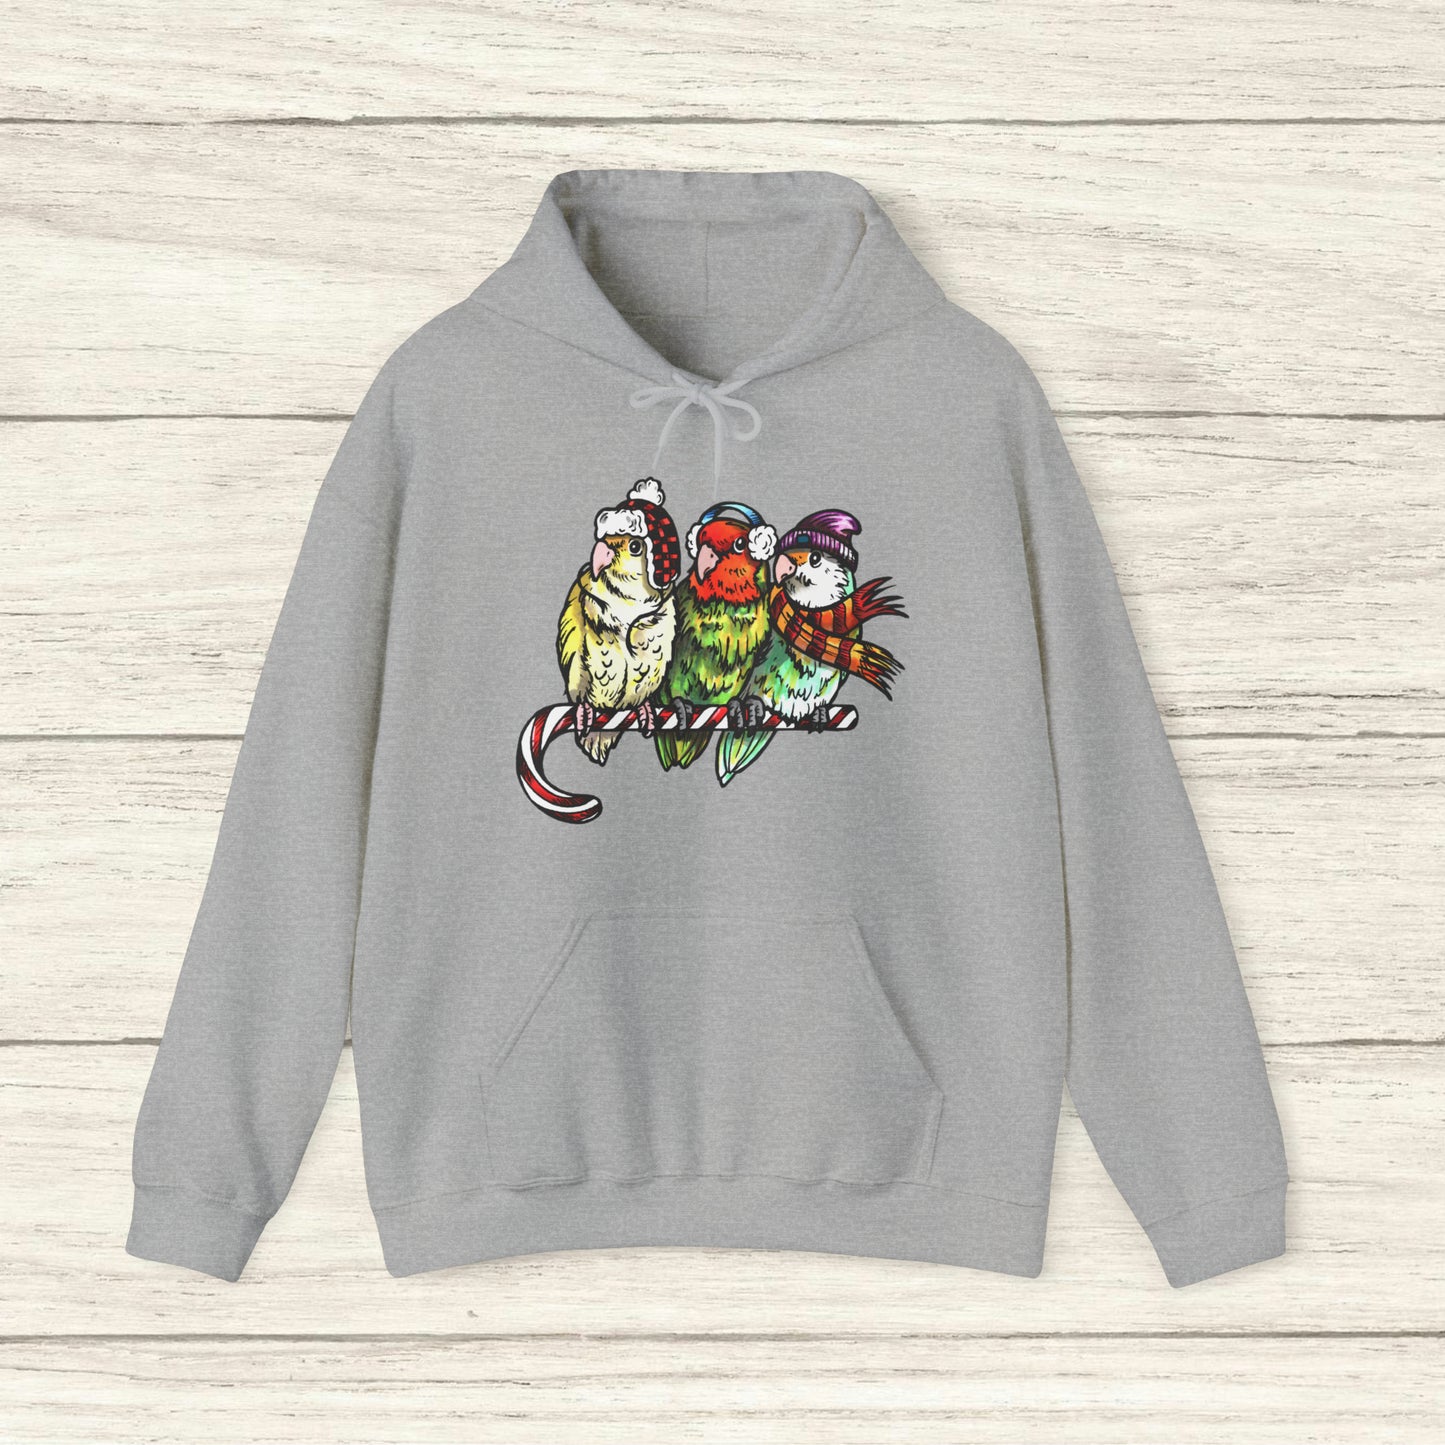 3 Lovebirds with Winter Wear & Perched on a Candy Cane, Hooded Sweatshirt